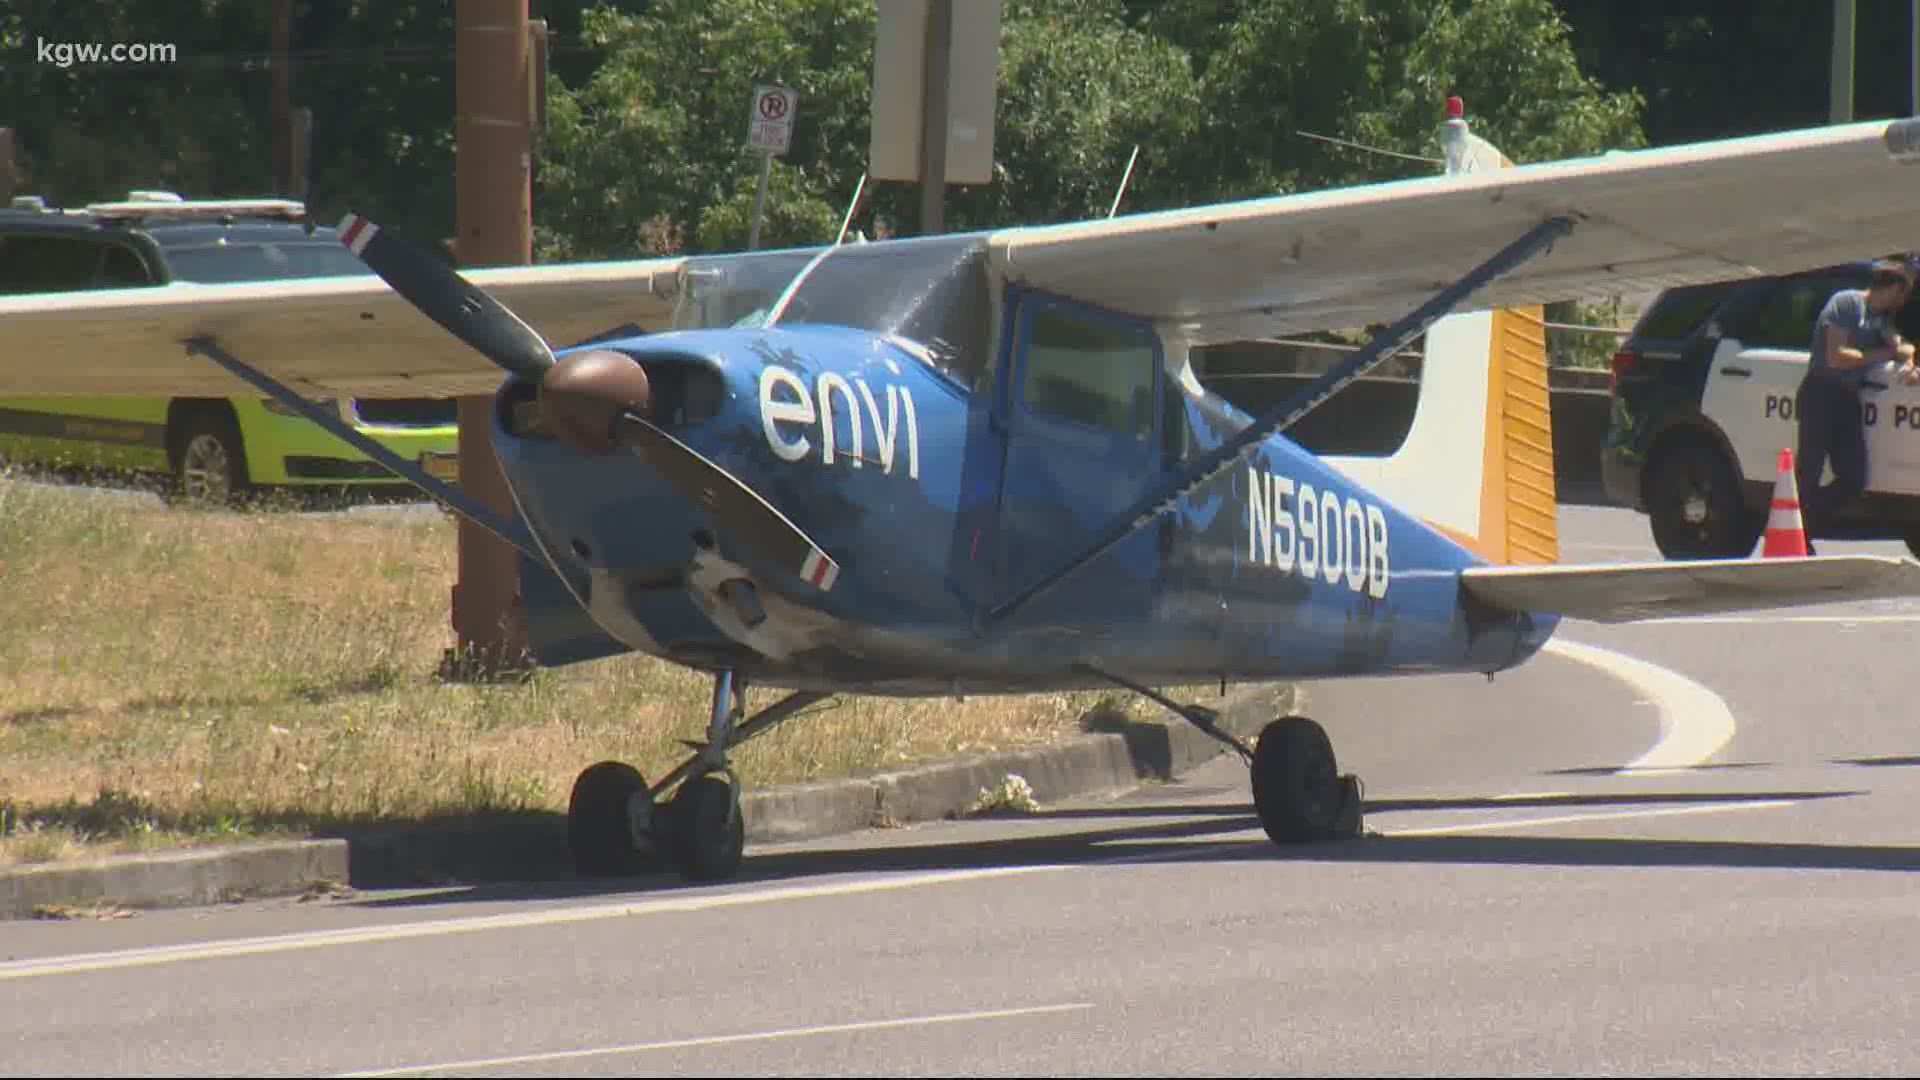 A single-engine plane emergency landed on a street in North Portland after the plane lost power. No one was injured.